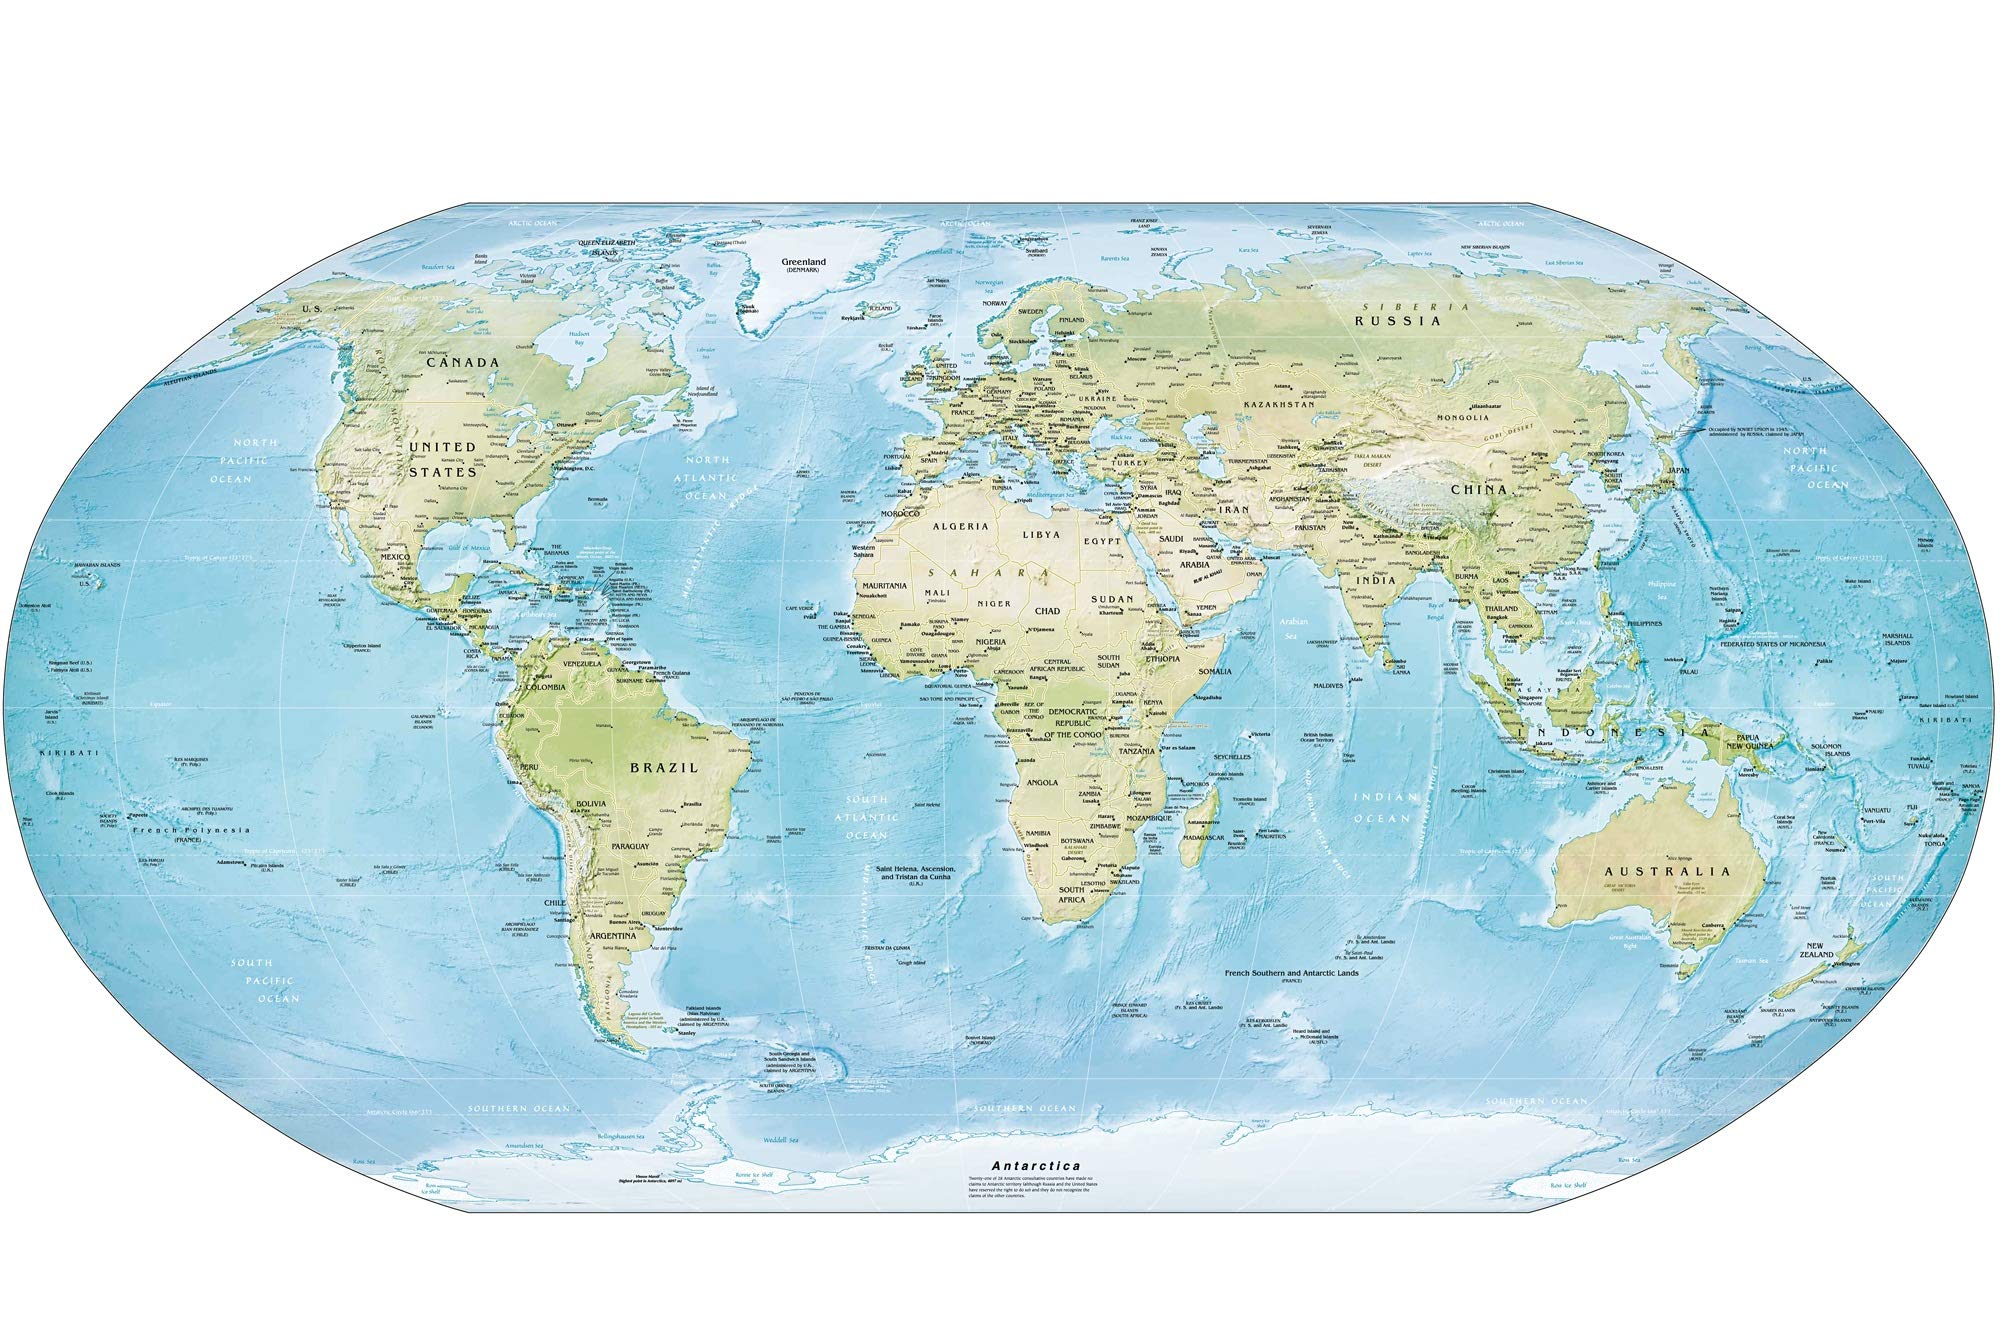 World Map Wall Paper, Physical Map of The World for Office, School, Non Tearable, Washable, Long Life, World Map Wallpaper by Walls and Murals (20 X 30 Inch) Latest 2019 Updated Edition